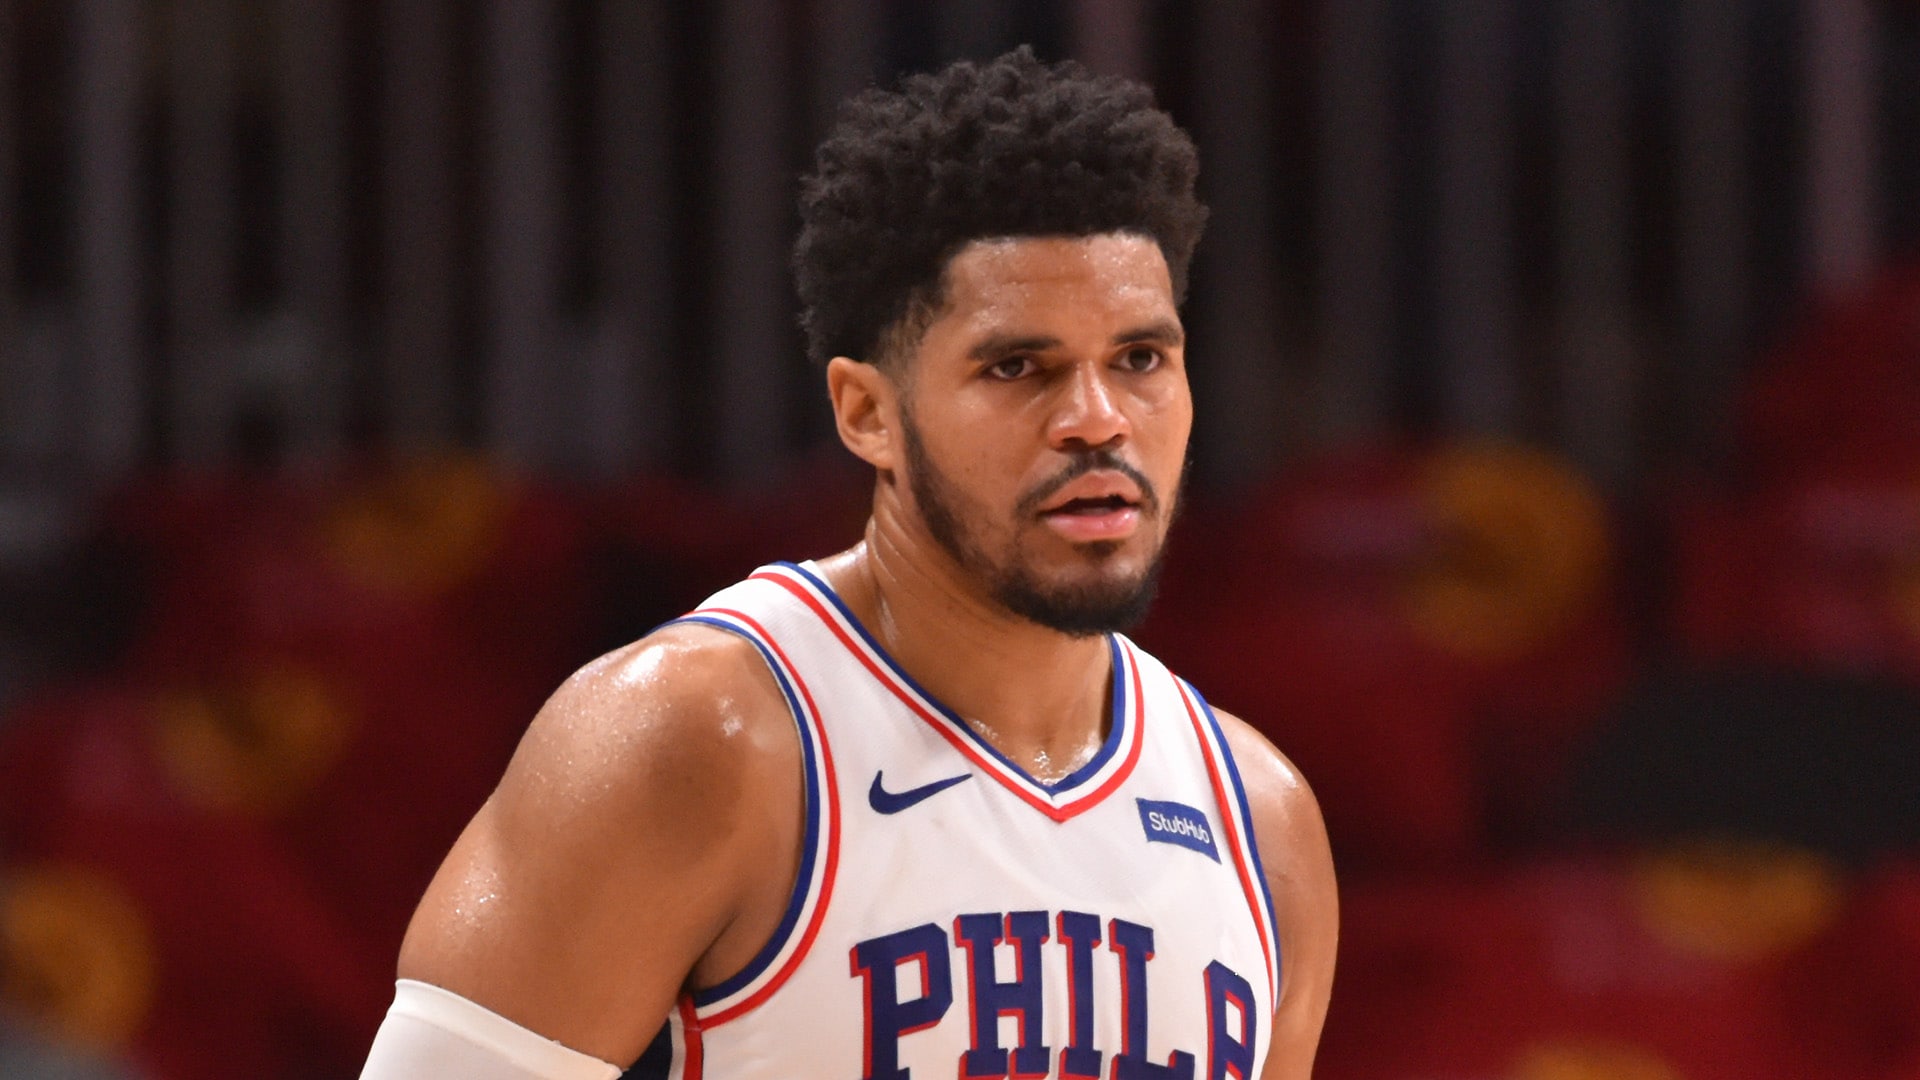 Harris intervenes in 76ers' Harden crisis Philadelphia 76ers star Tobias Harris reacted to reports that teammate Ben Simmons wants James Harden to be traded to the Brooklyn Nets. "Ben Simmons is our brother and we love him. He wants to be a part of this team and we want to be with him. Those who are making these rumors, please stop."